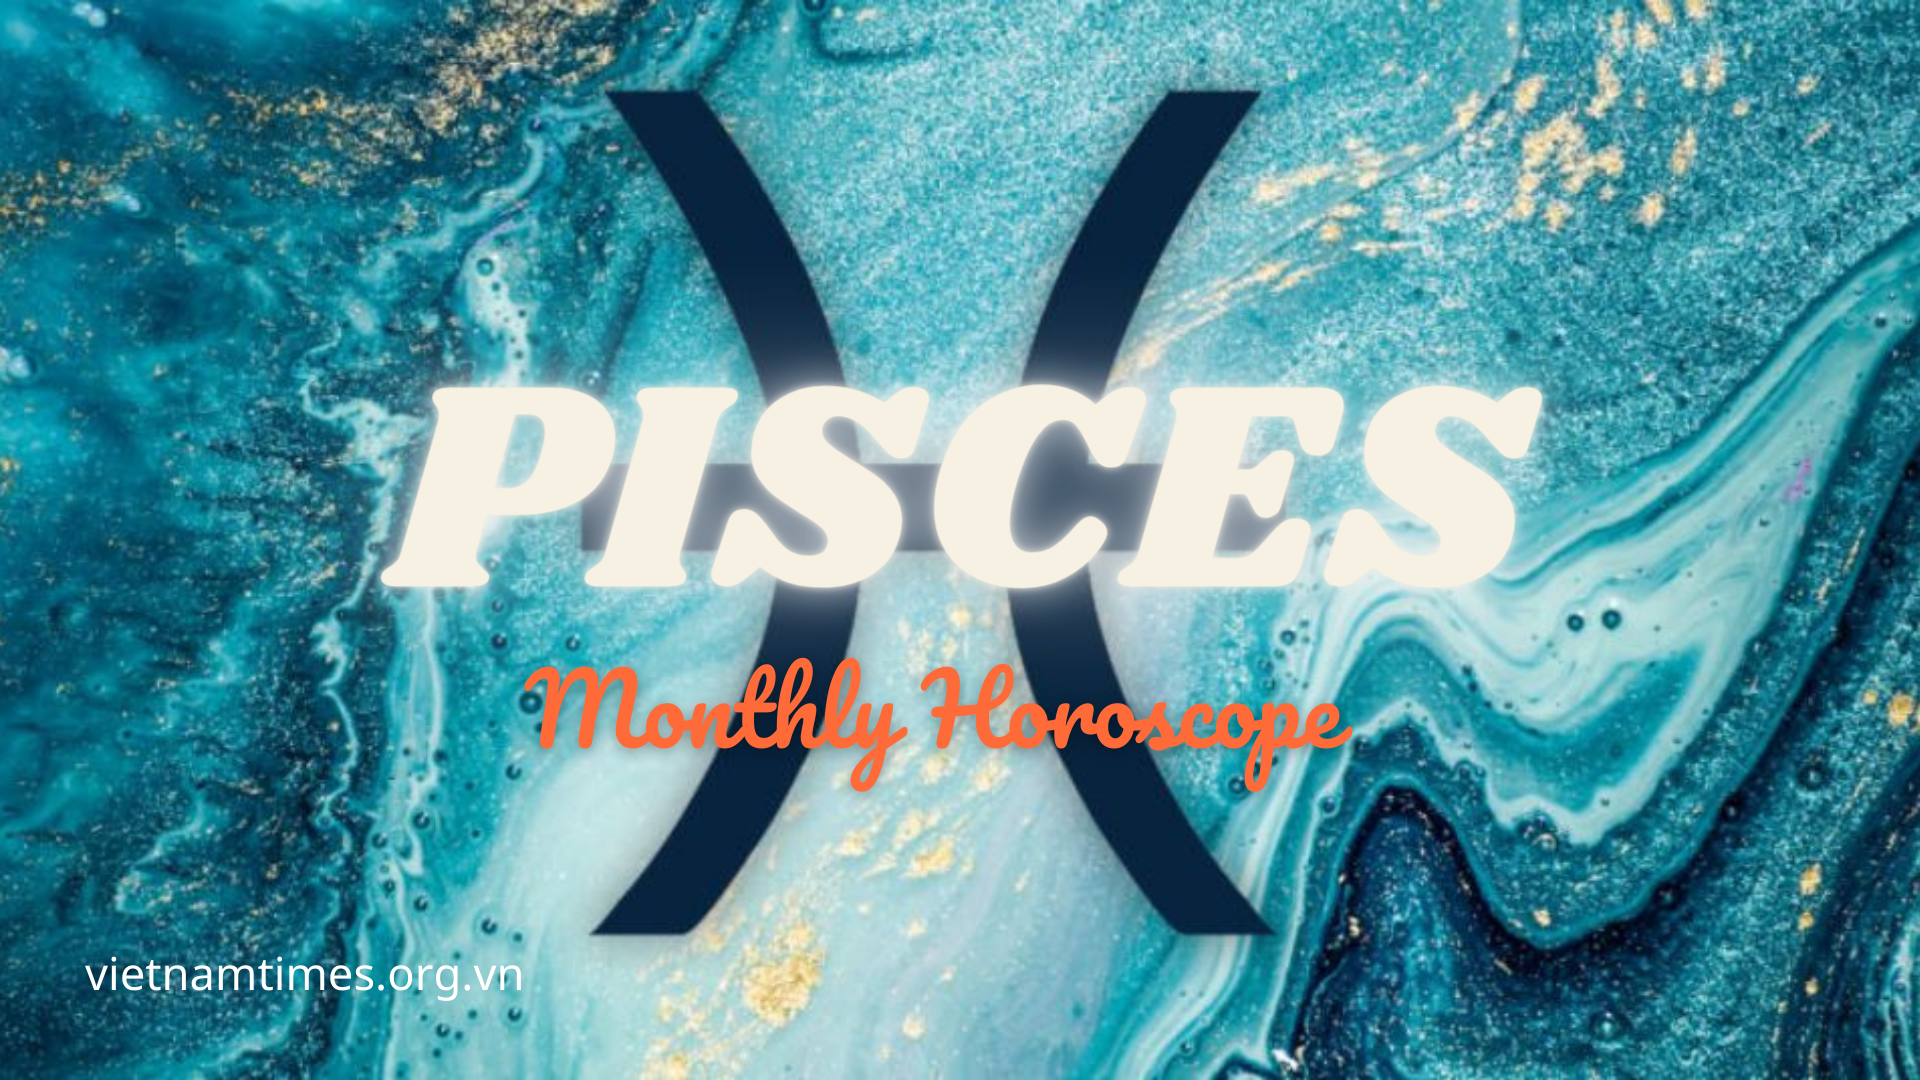 Pisces Horoscope October 2021: Monthly Predictions for Love, Financial, Career and Health